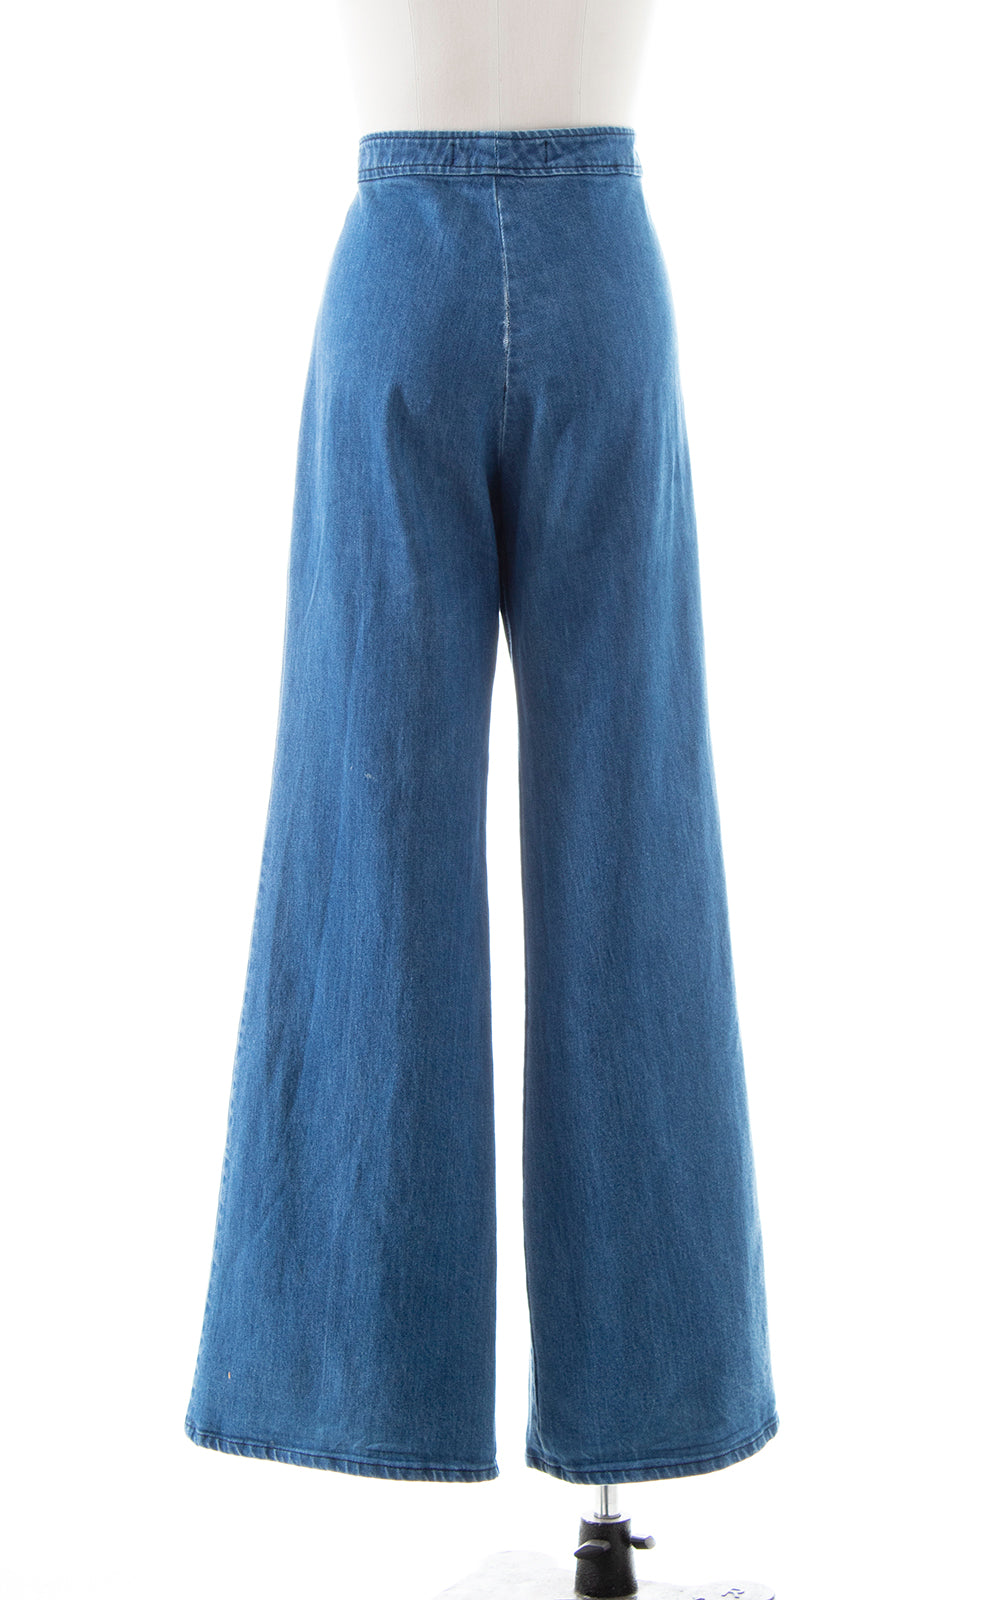 Modern STONED IMMACULATE 1970s Style Wide Leg Jeans | medium/large